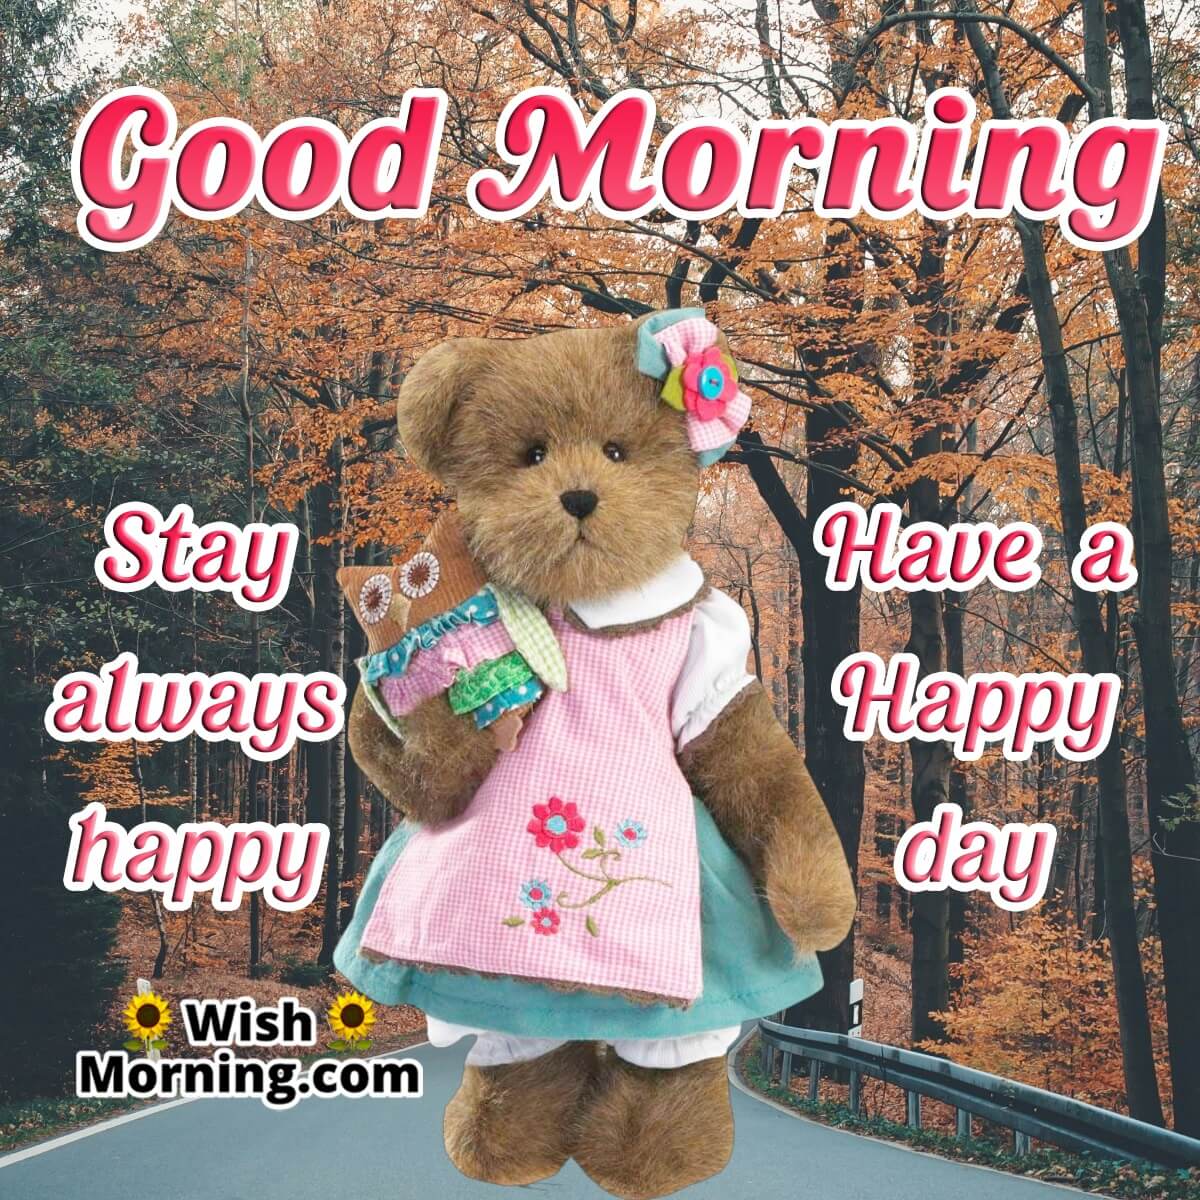 Good Morning Have A Happy Day